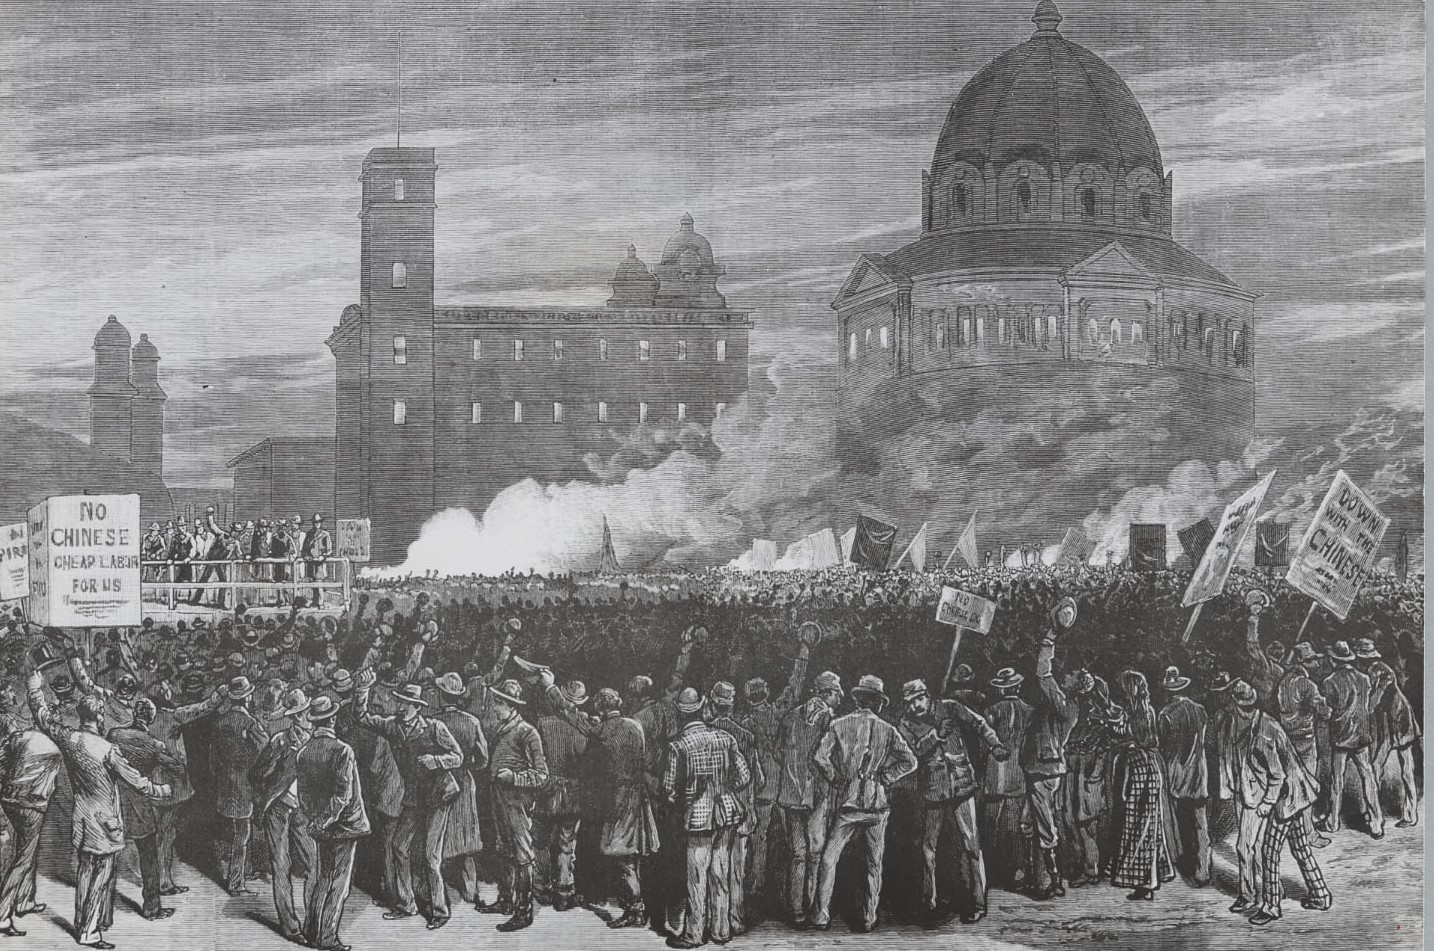 photo: An anti-Chinese riot takes place front of San Francisco City Hall in 1877, where the Main Library now stands. Line drawing by H.A. Rodgers. Courtesy of the California Historical Society